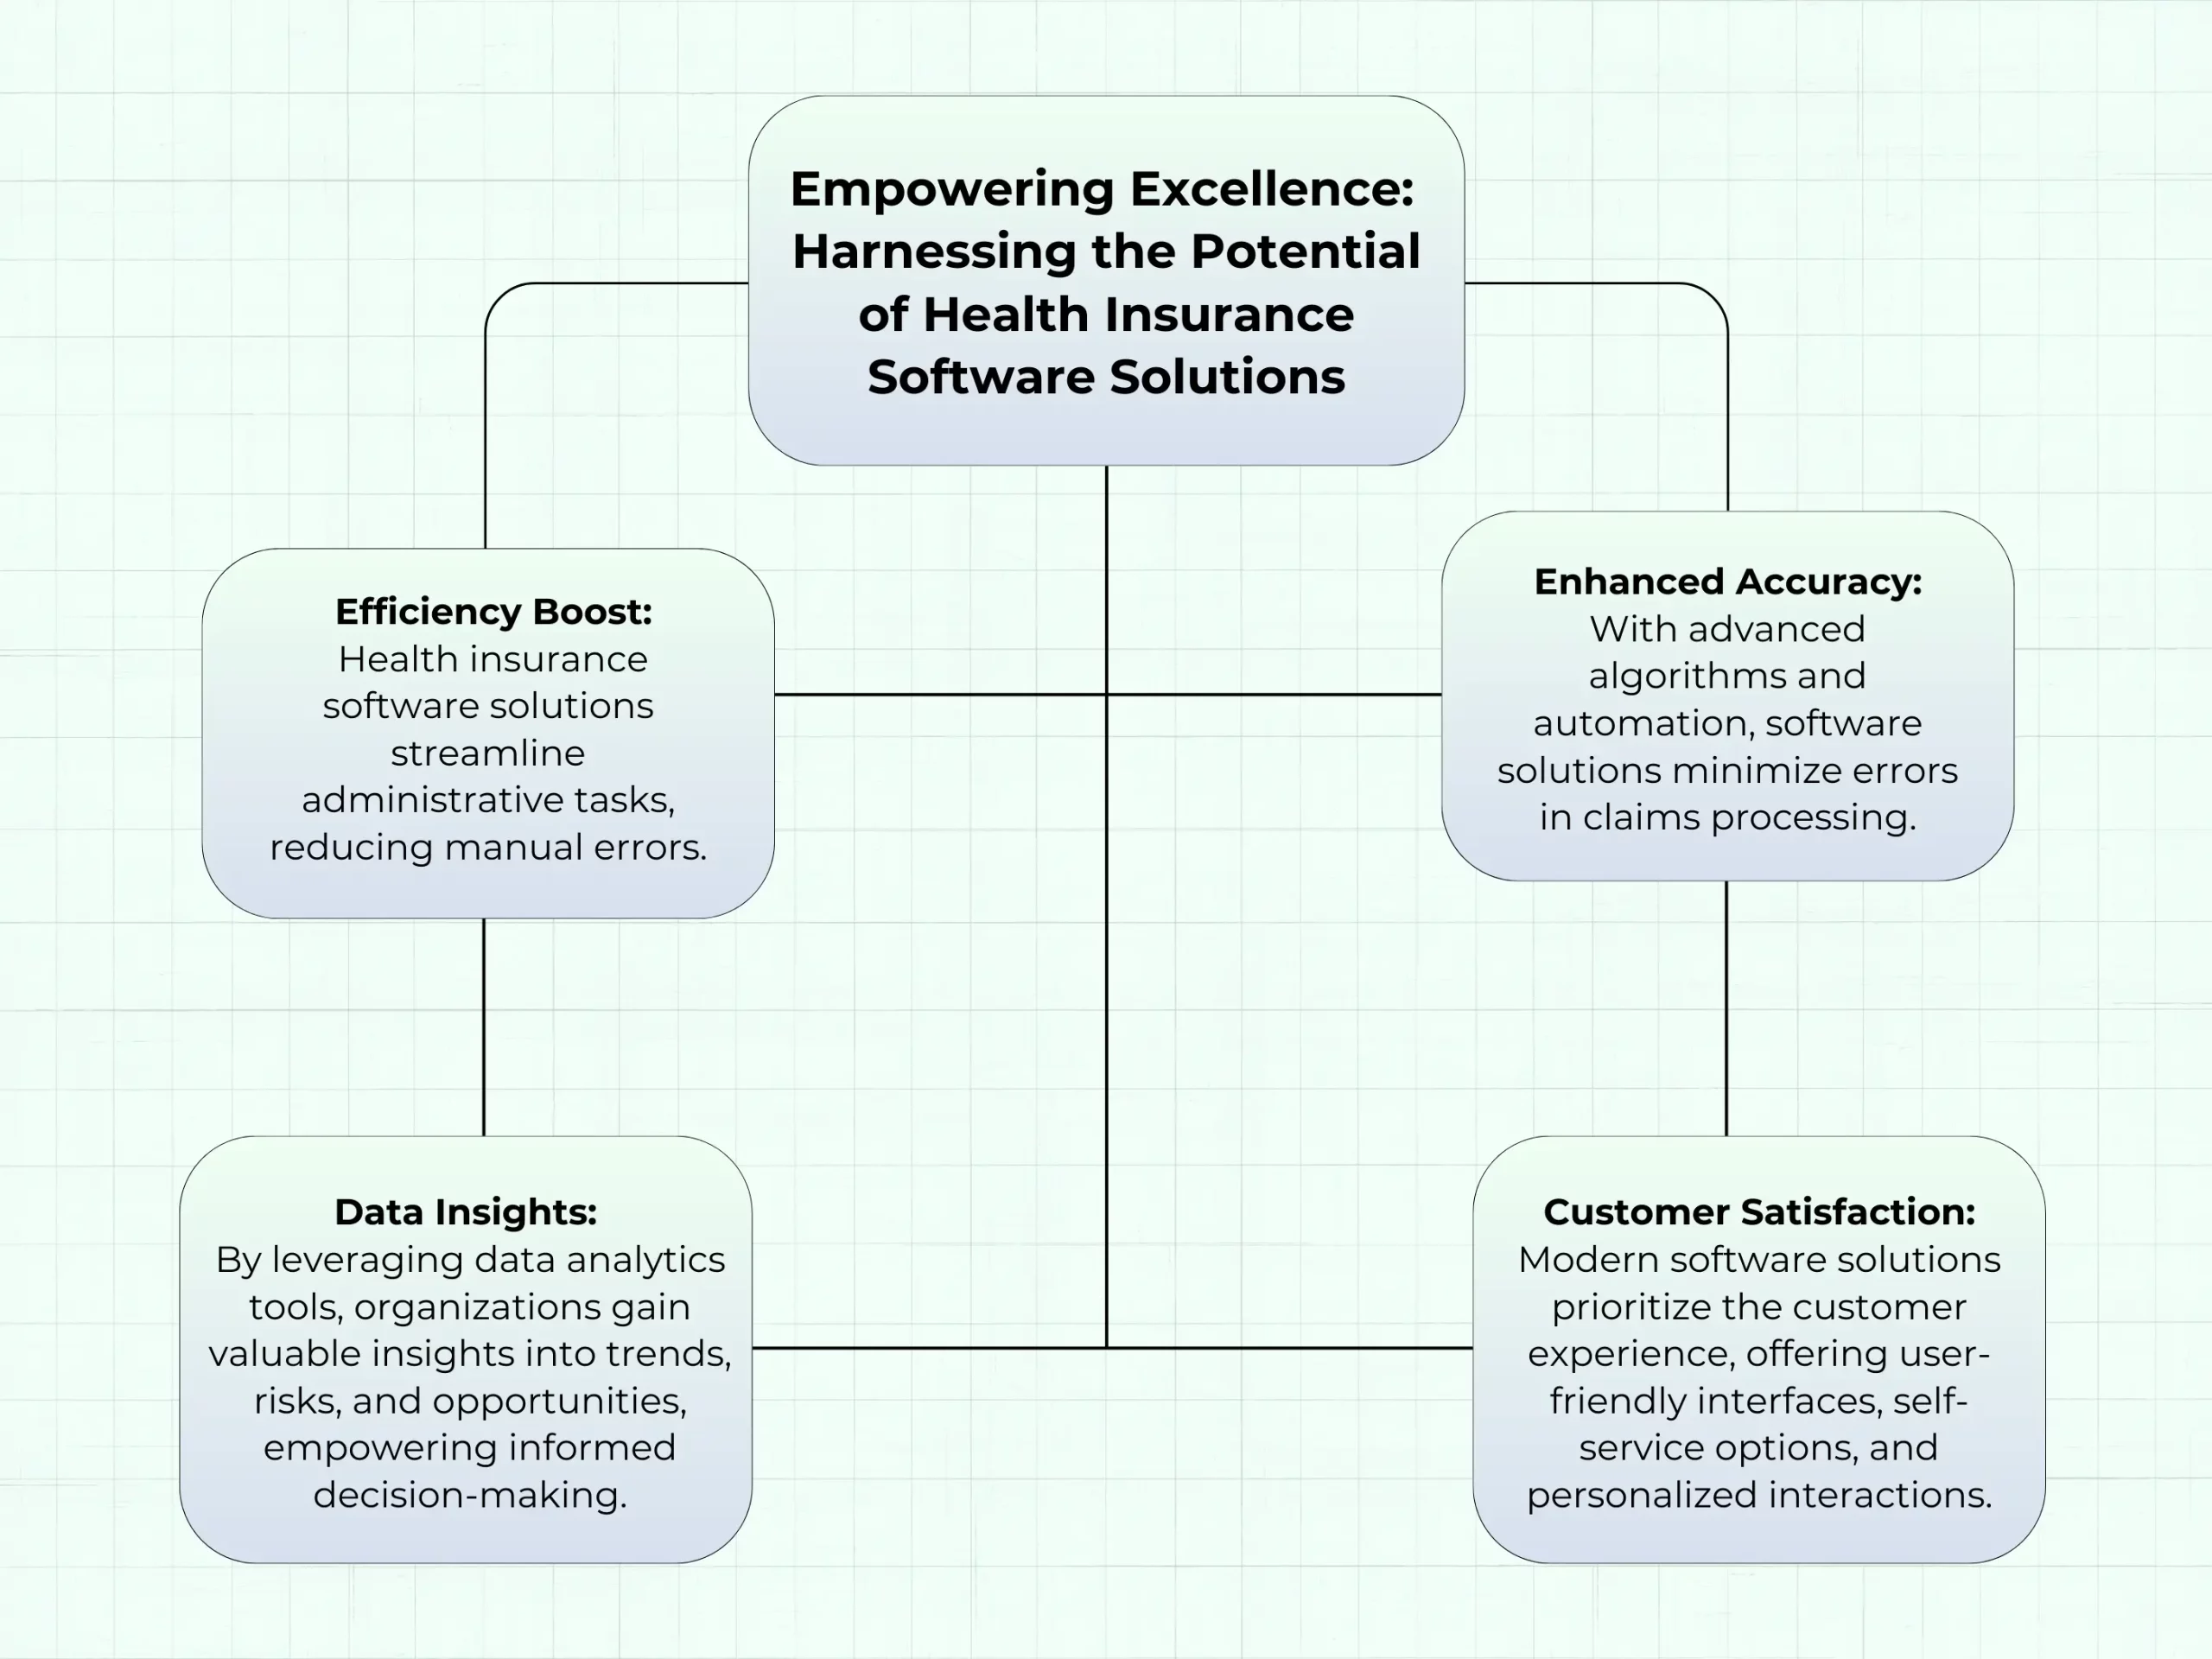 Empowering Excellence_ Harnessing the Potential of Health Insurance Software Solutions